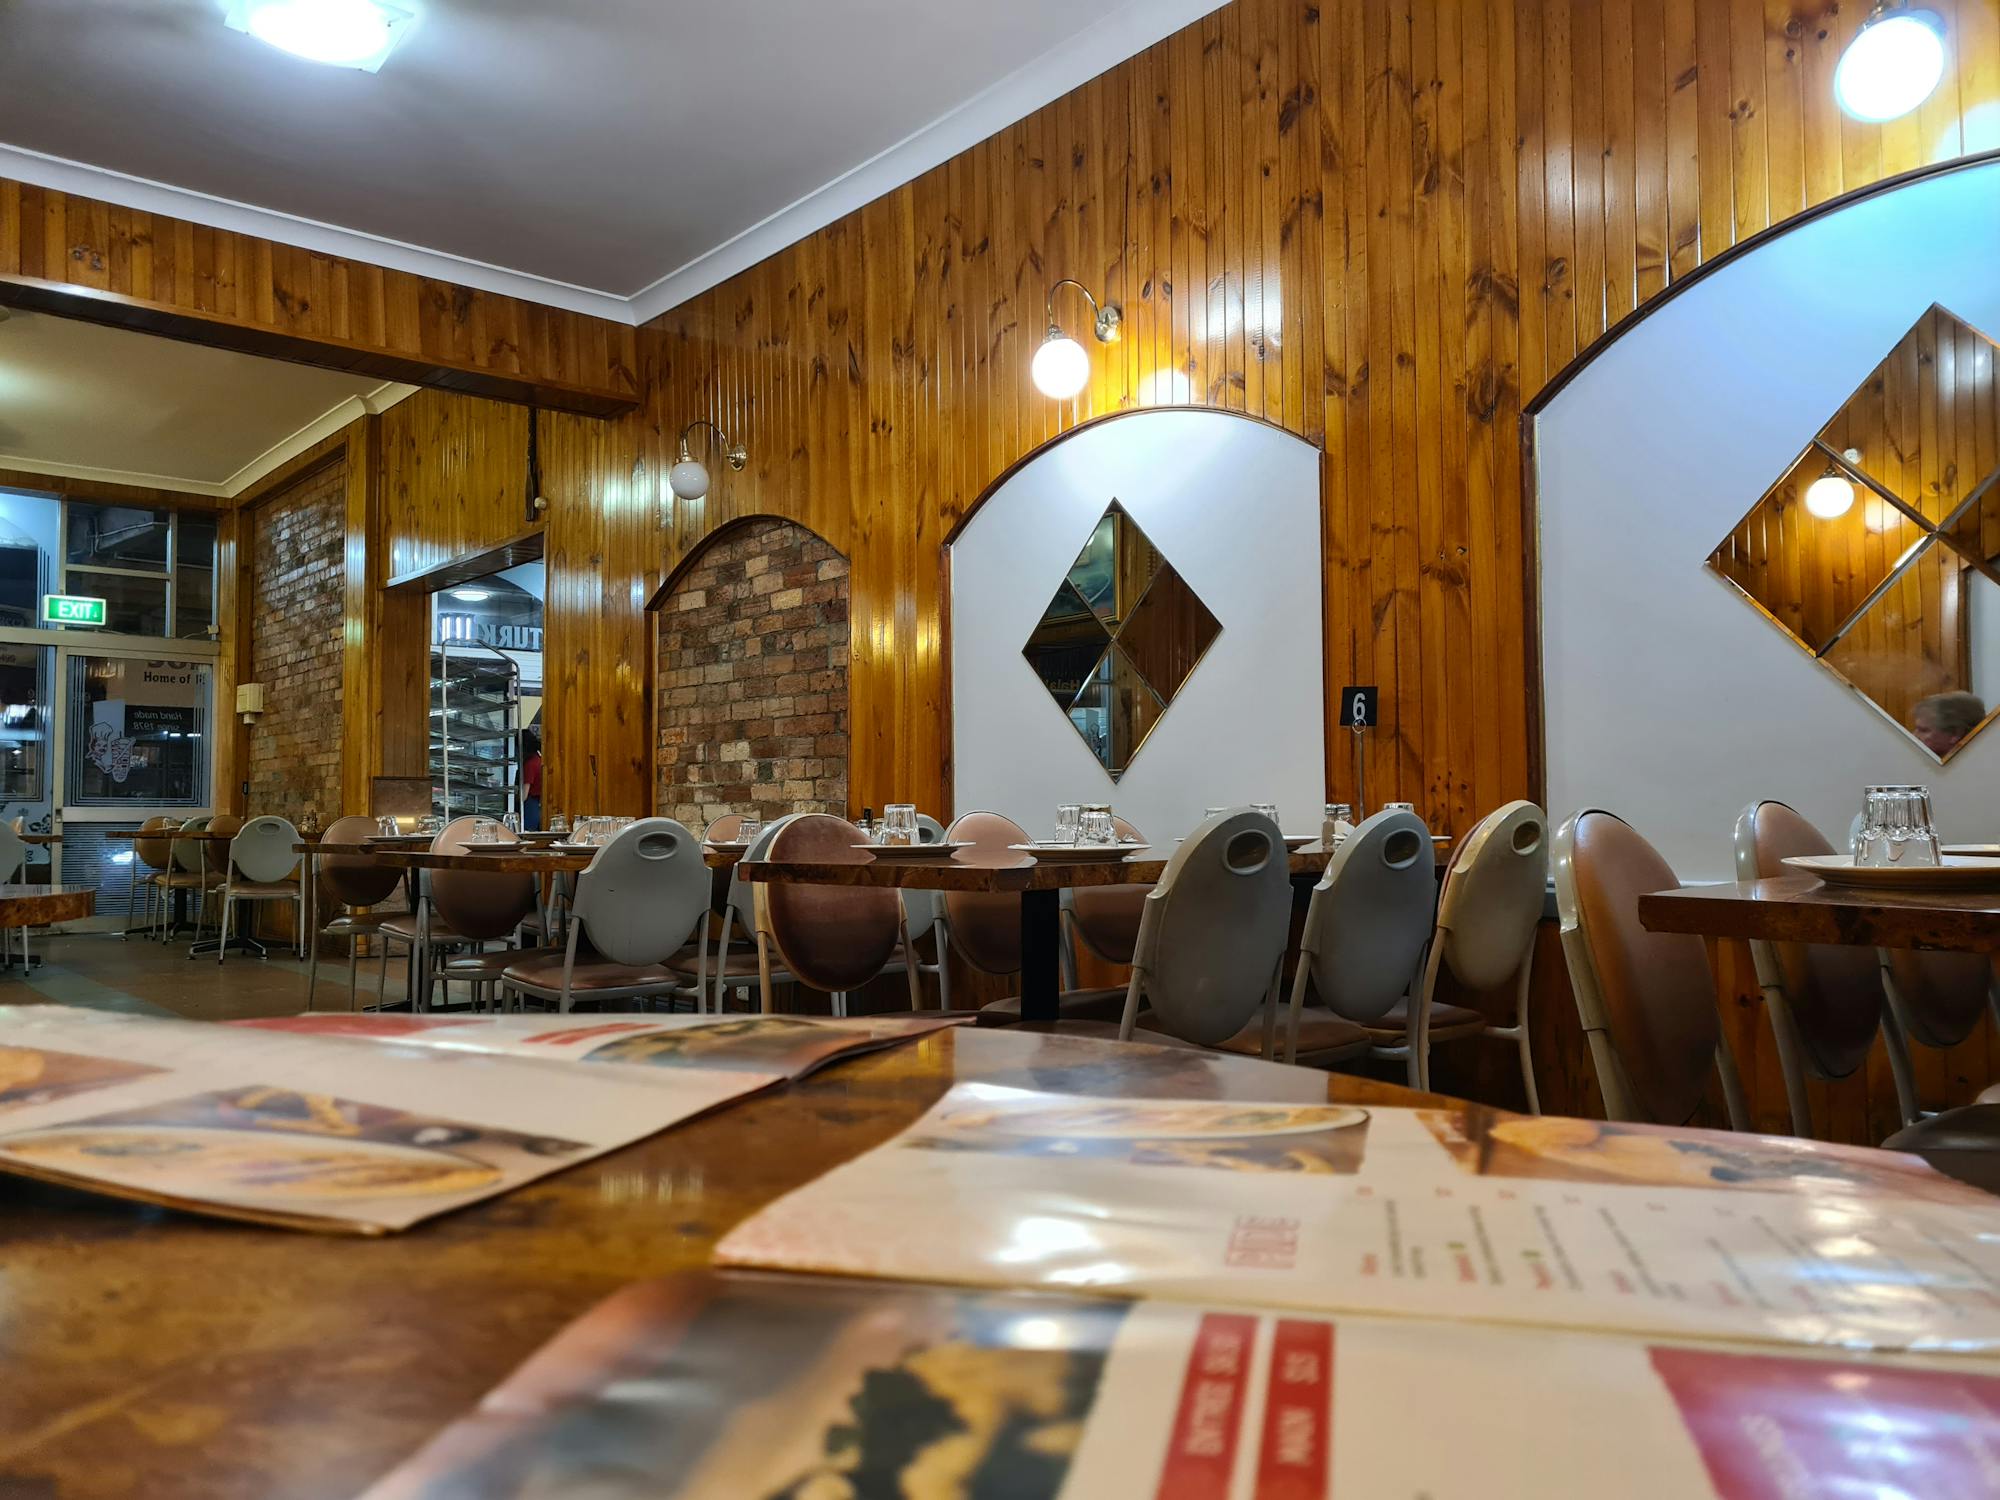 Inside of Alasya with wooden panelling, mirrors, and old-school seating.